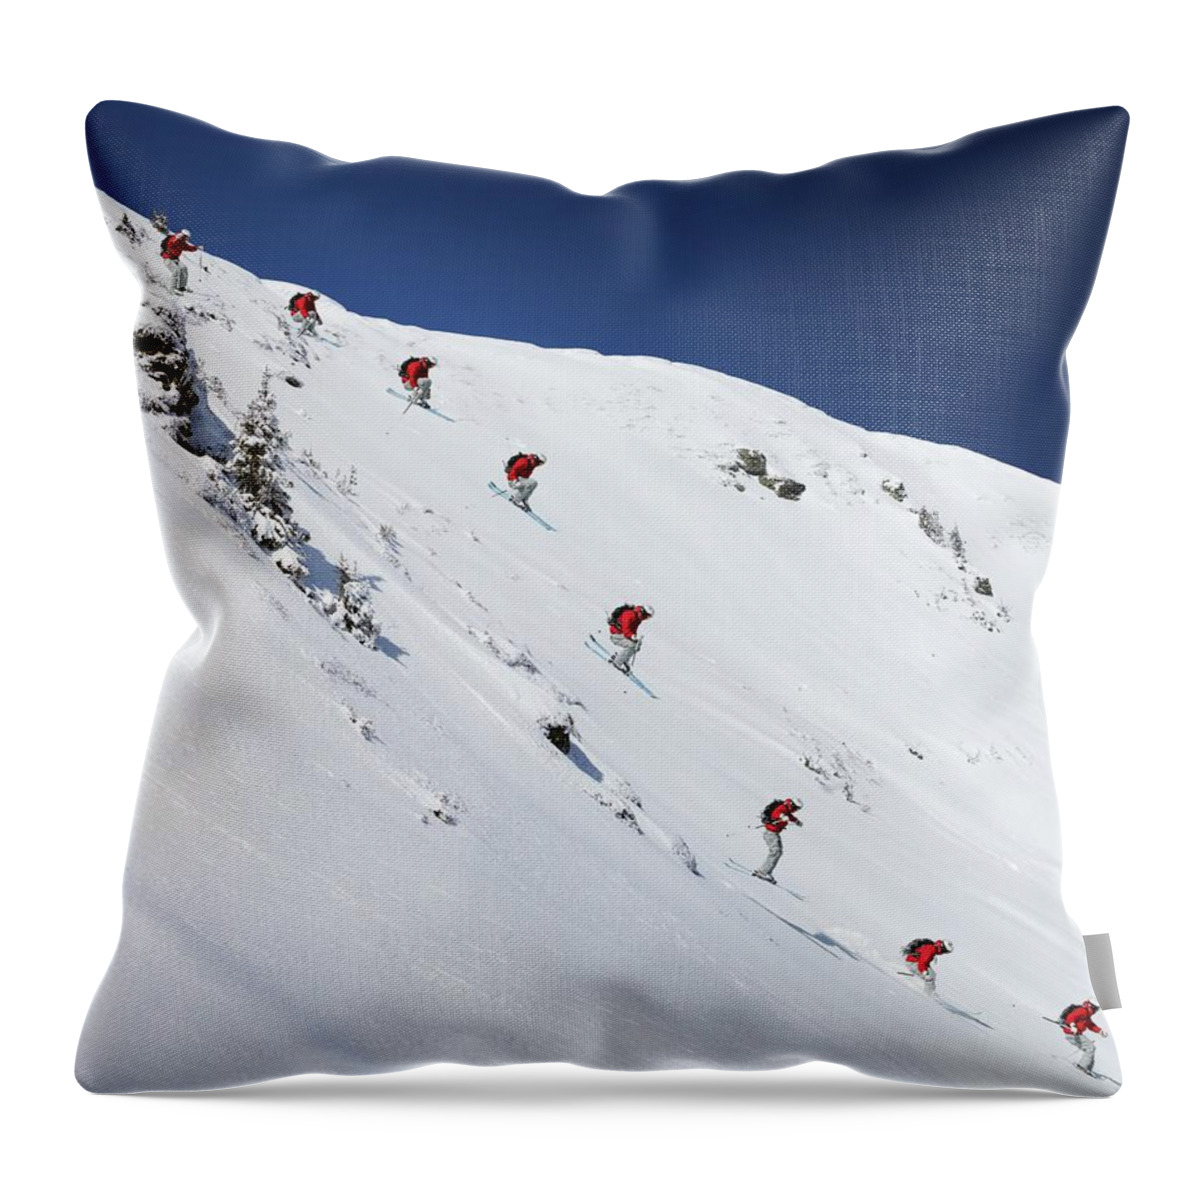 Skiing Throw Pillow featuring the photograph Sequence Of Male Skier Jumping Down by Adie Bush